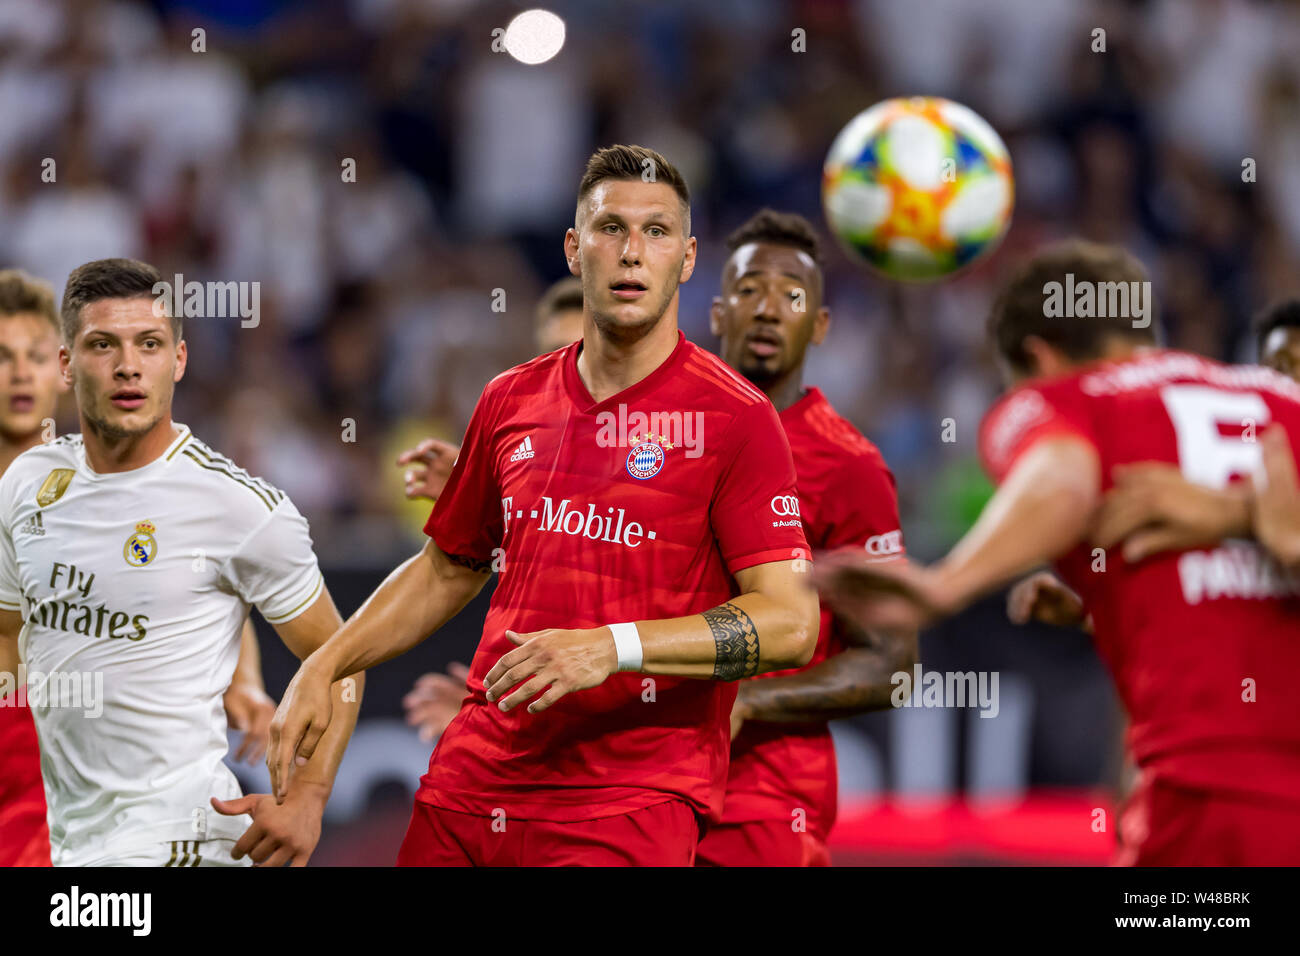 Houston, Texas, USA. 20th July, 2019. Bayern Munich defender Niklas Sule (4) during the International Champions Cup between Real Madrid and Bayern Munich FC at NRG Stadium in Houston, Texas. The final Bayern Munich wins 3-1. © Maria Lysaker/CSM/Alamy Live News Stock Photo